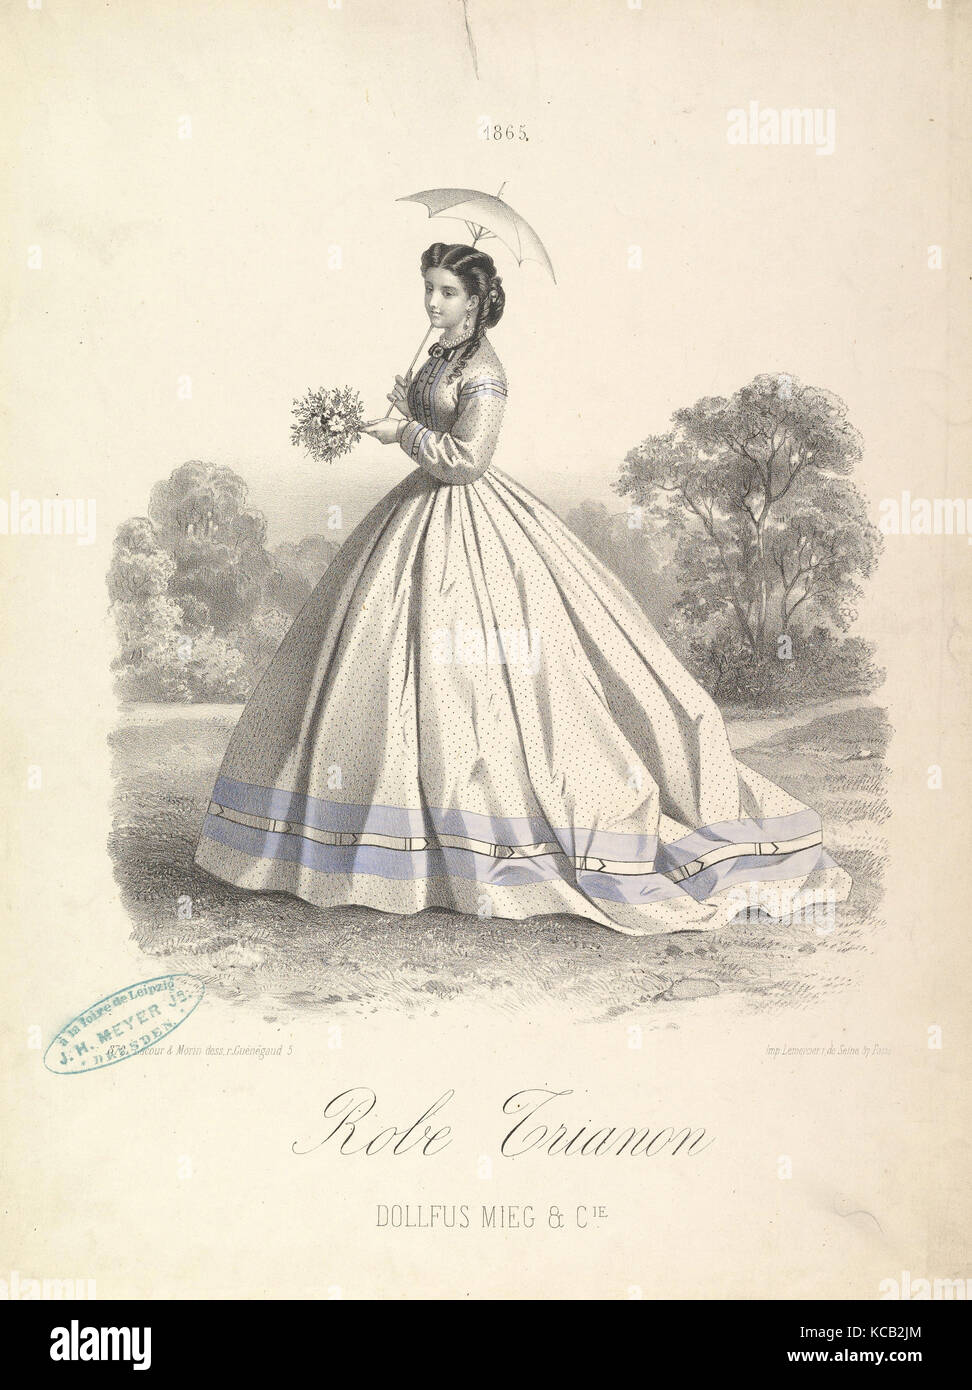 Robe Trianon, Dollfus Mieg & Cie, Lacour et Morin, 1865 Banque D'Images